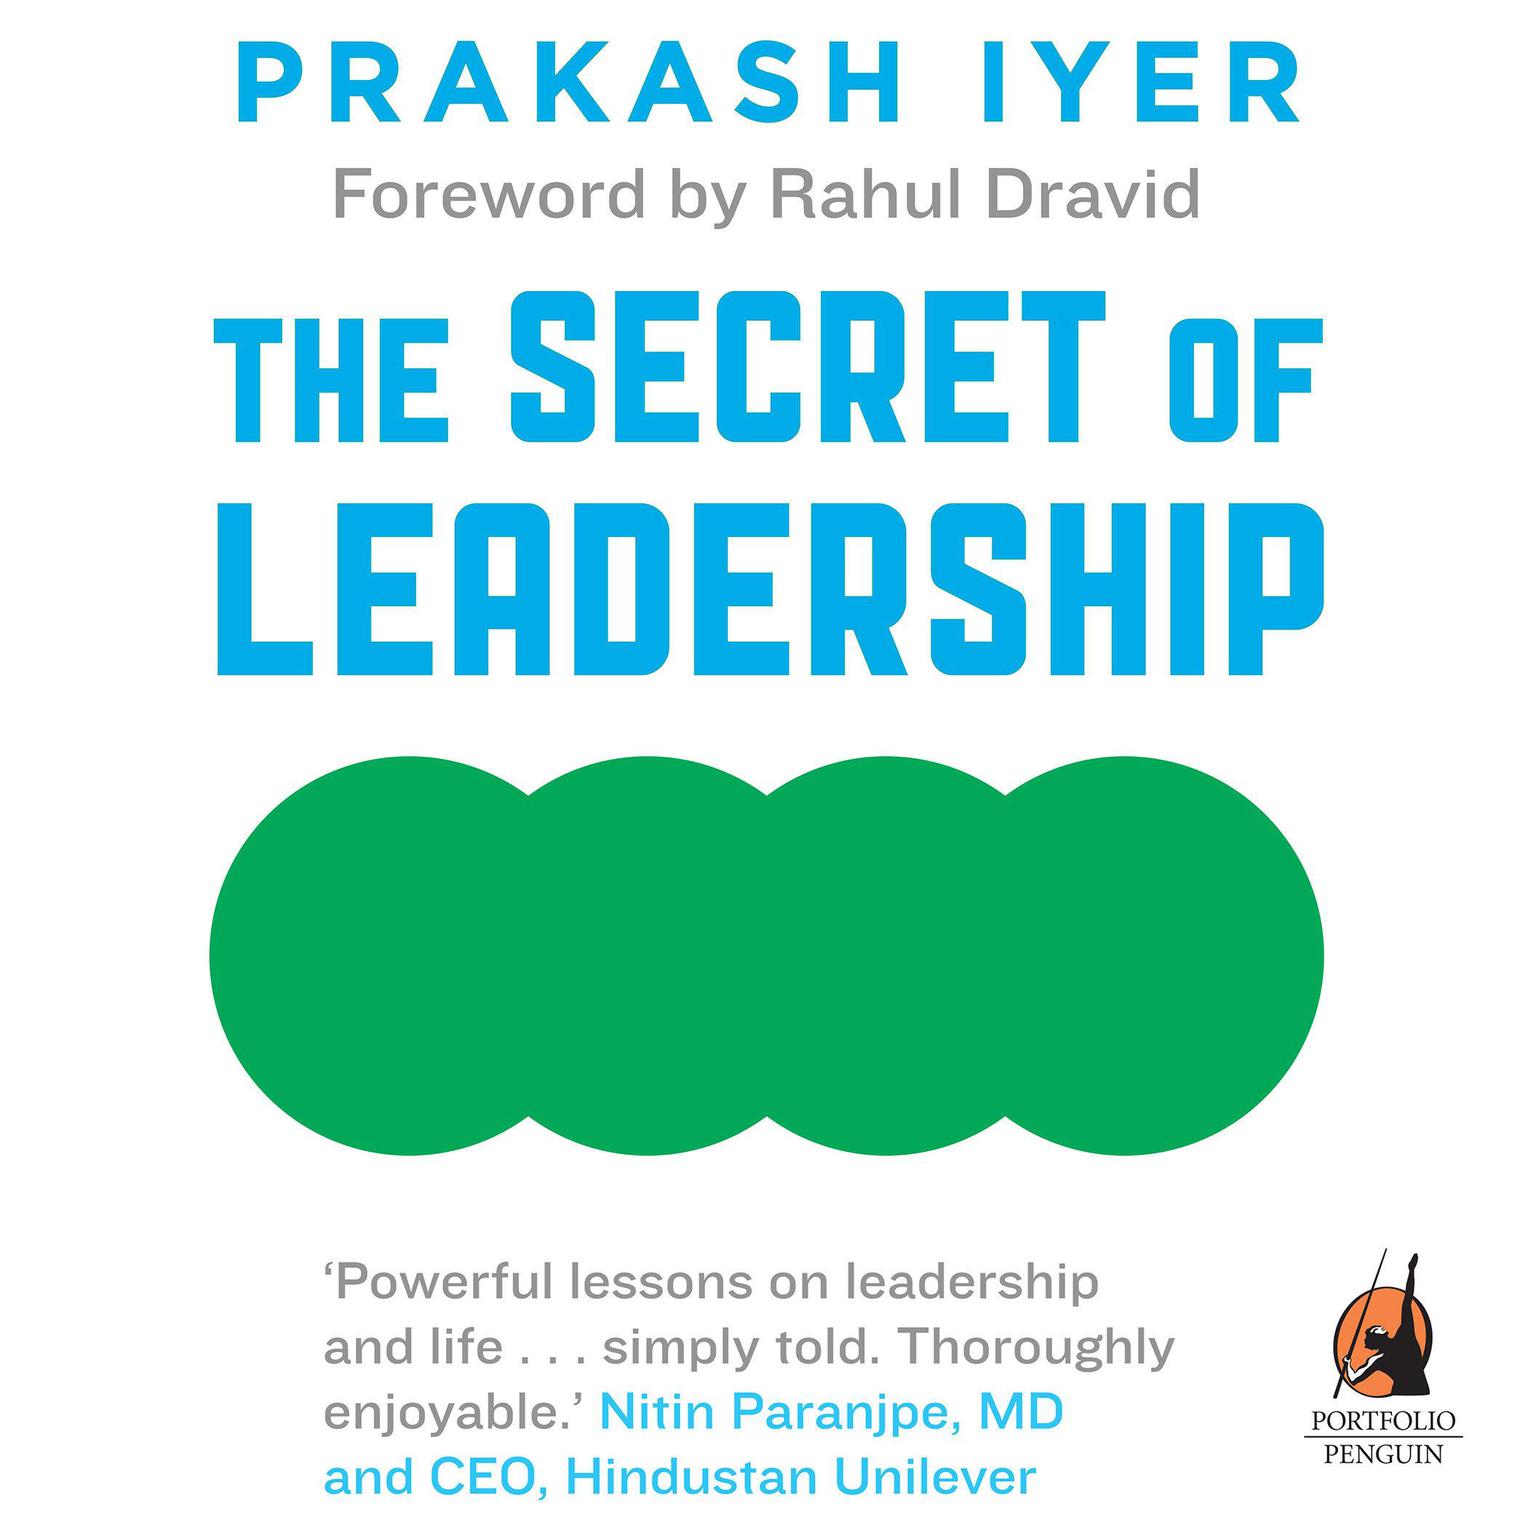 The Secret of Leadership: Stories to Awaken, Inspire and Unleash the Leader Within Audiobook, by Prakash Iyer